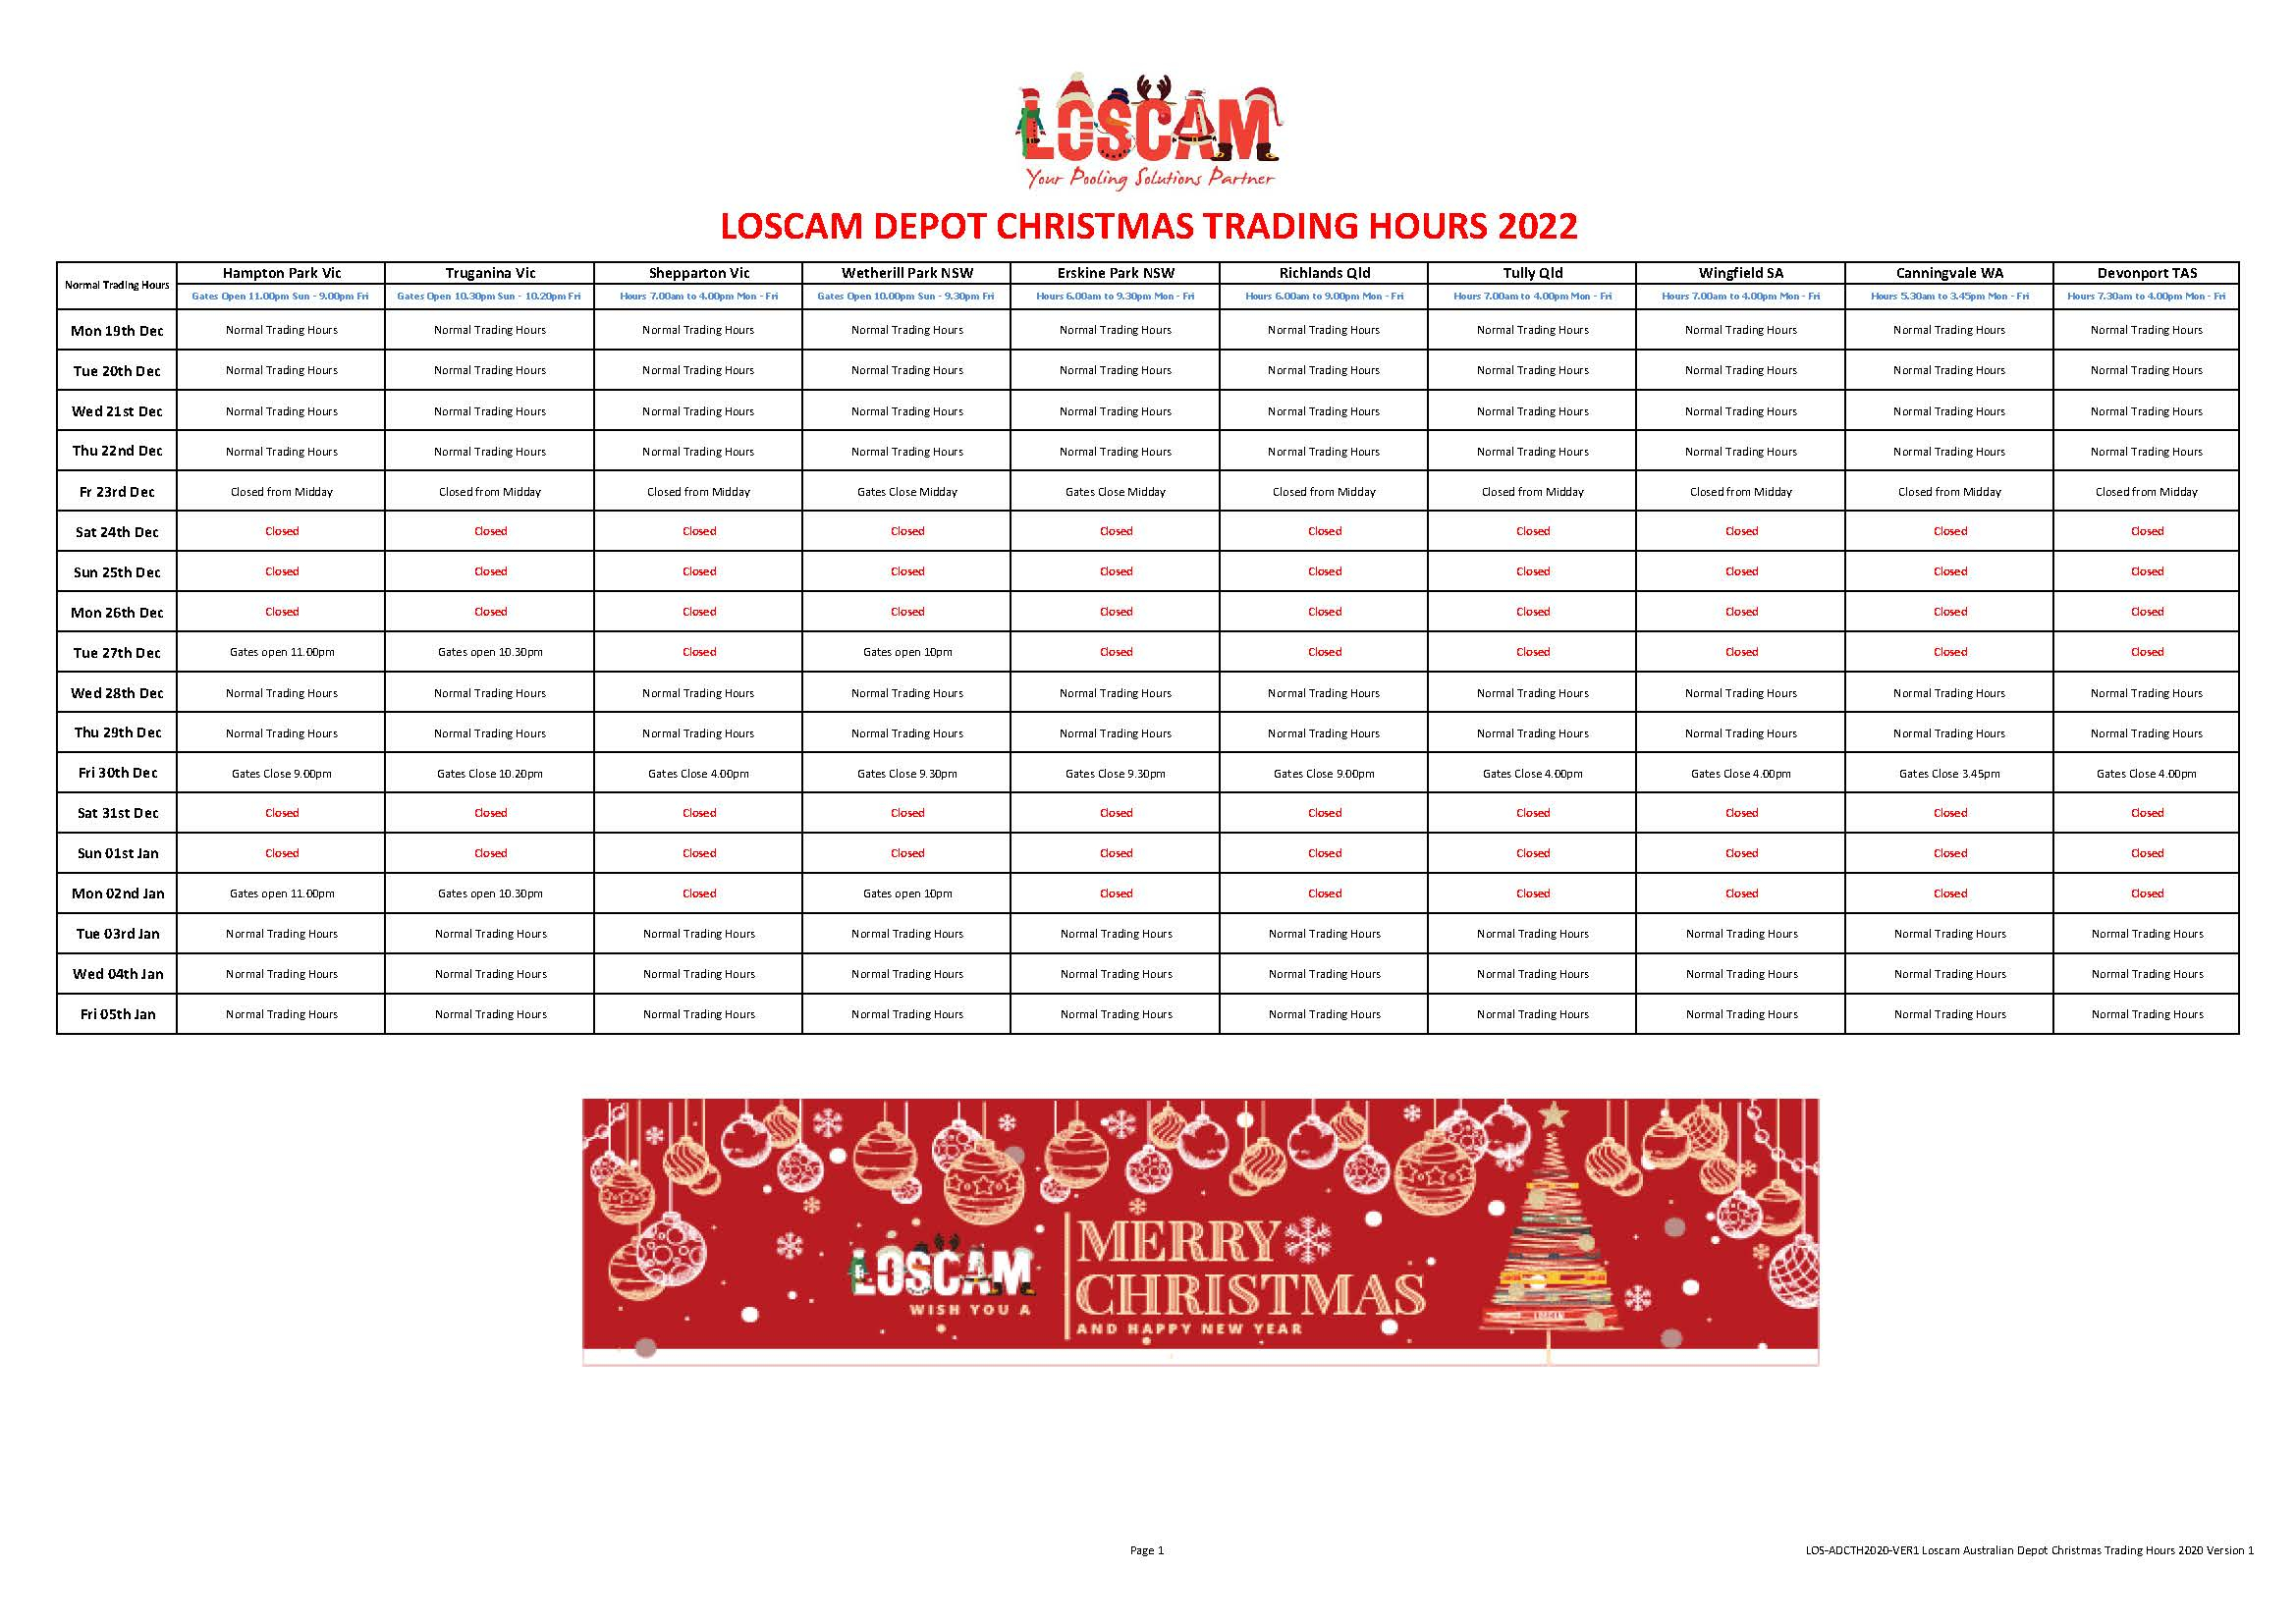 Los Adcth2020 Ver1 Loscam Australian Depot Christmas Trading Hours 2022 Version 1